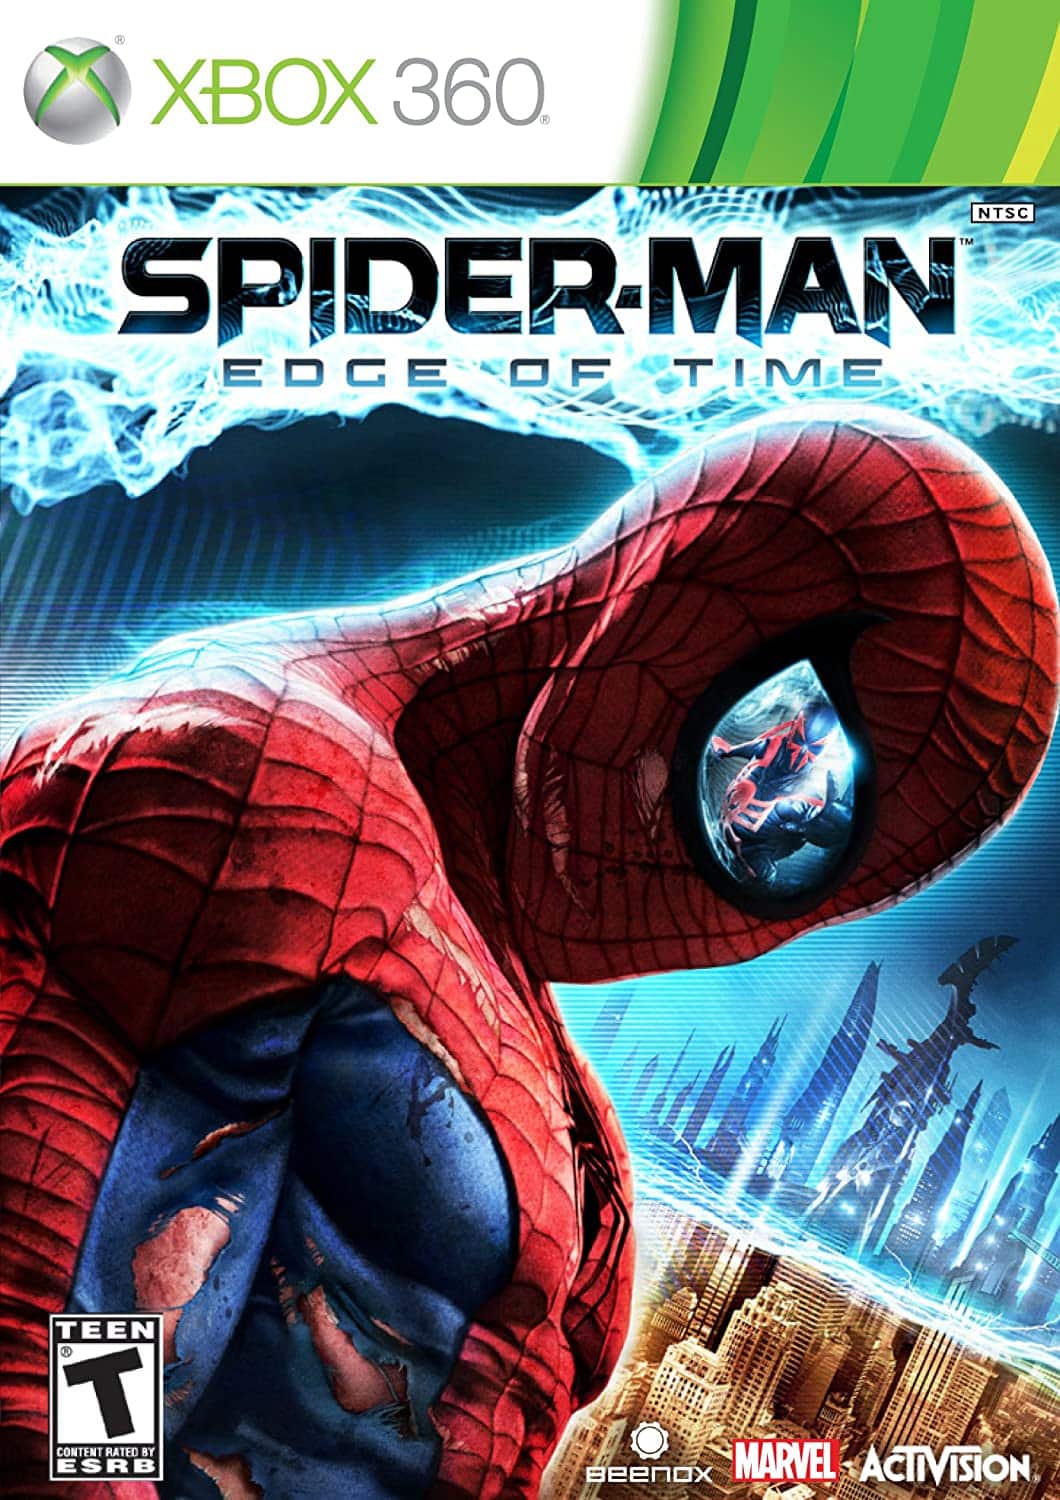 Spider-Man Edge of Time facts and statistics